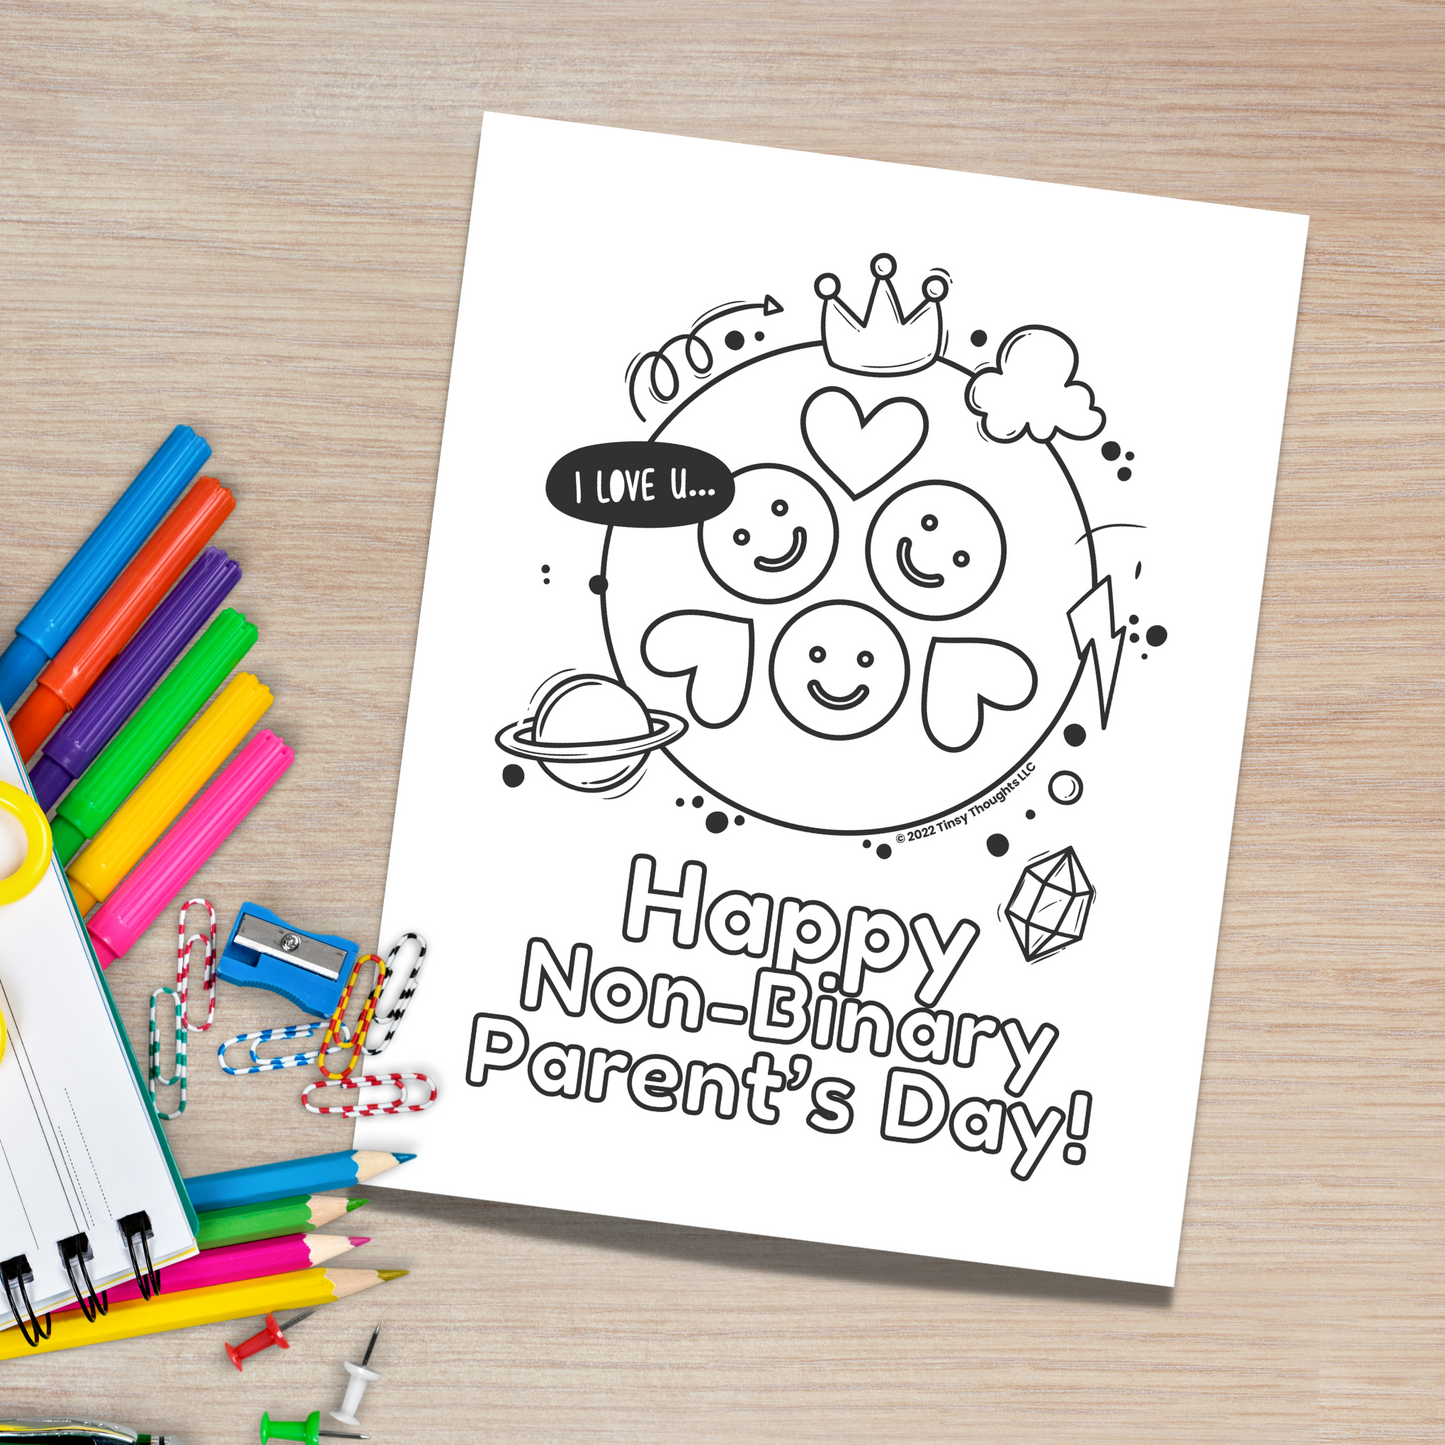 Non-binary Parent's Day FREE Coloring Page